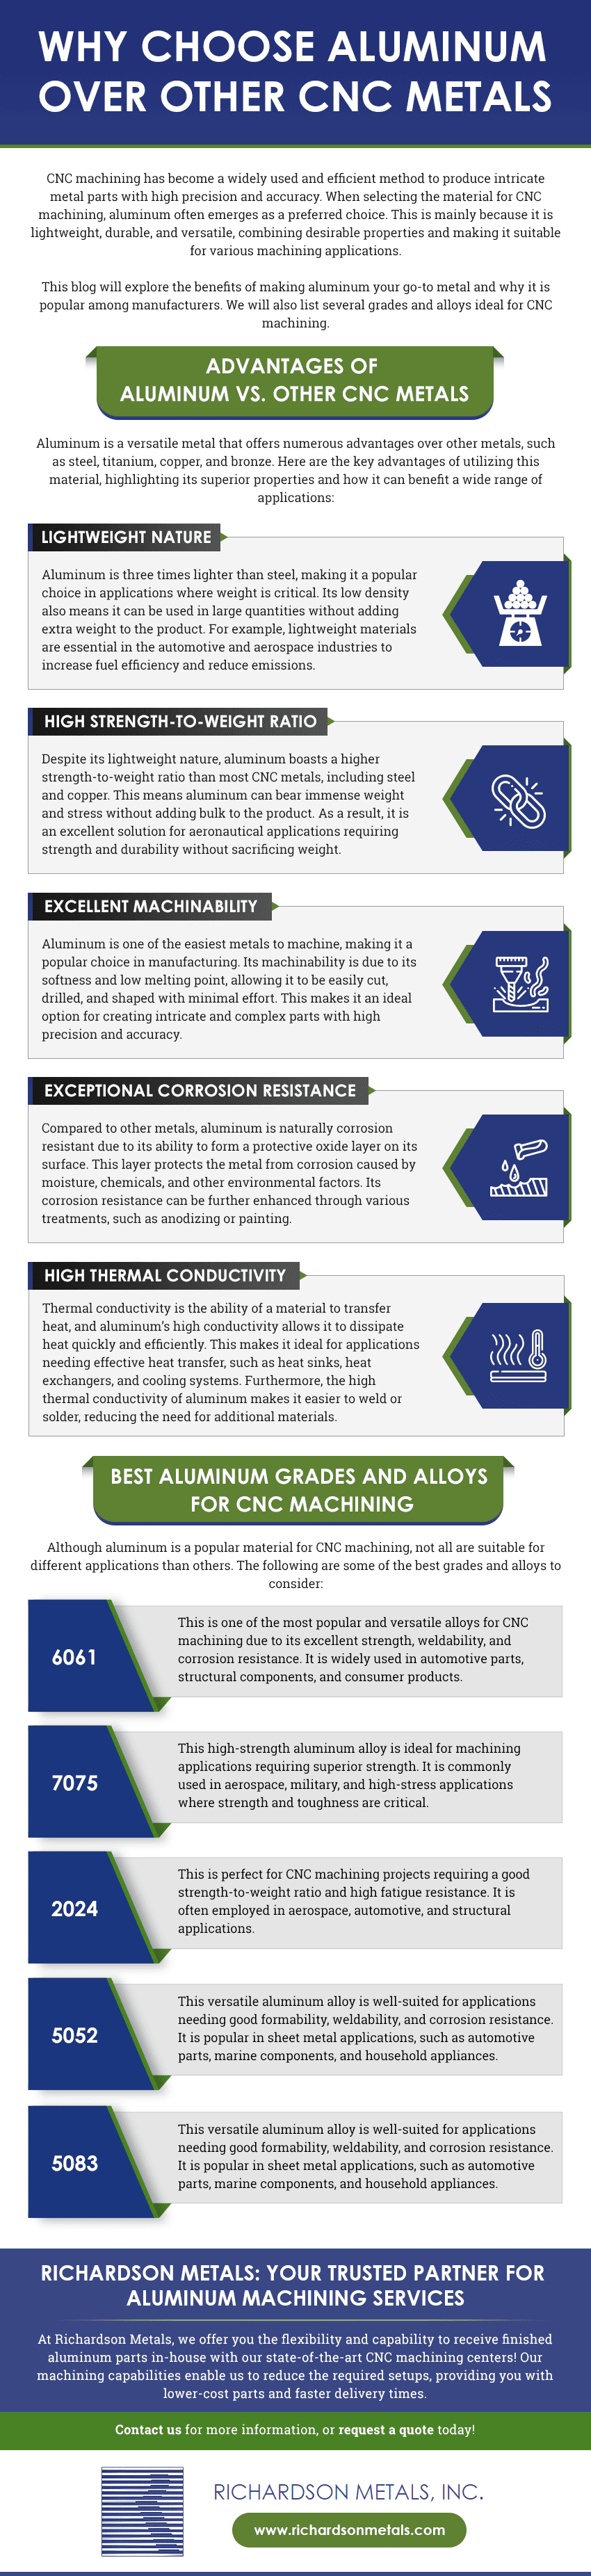 Why-Choose-Aluminum-Over-Other-CNC-Metals